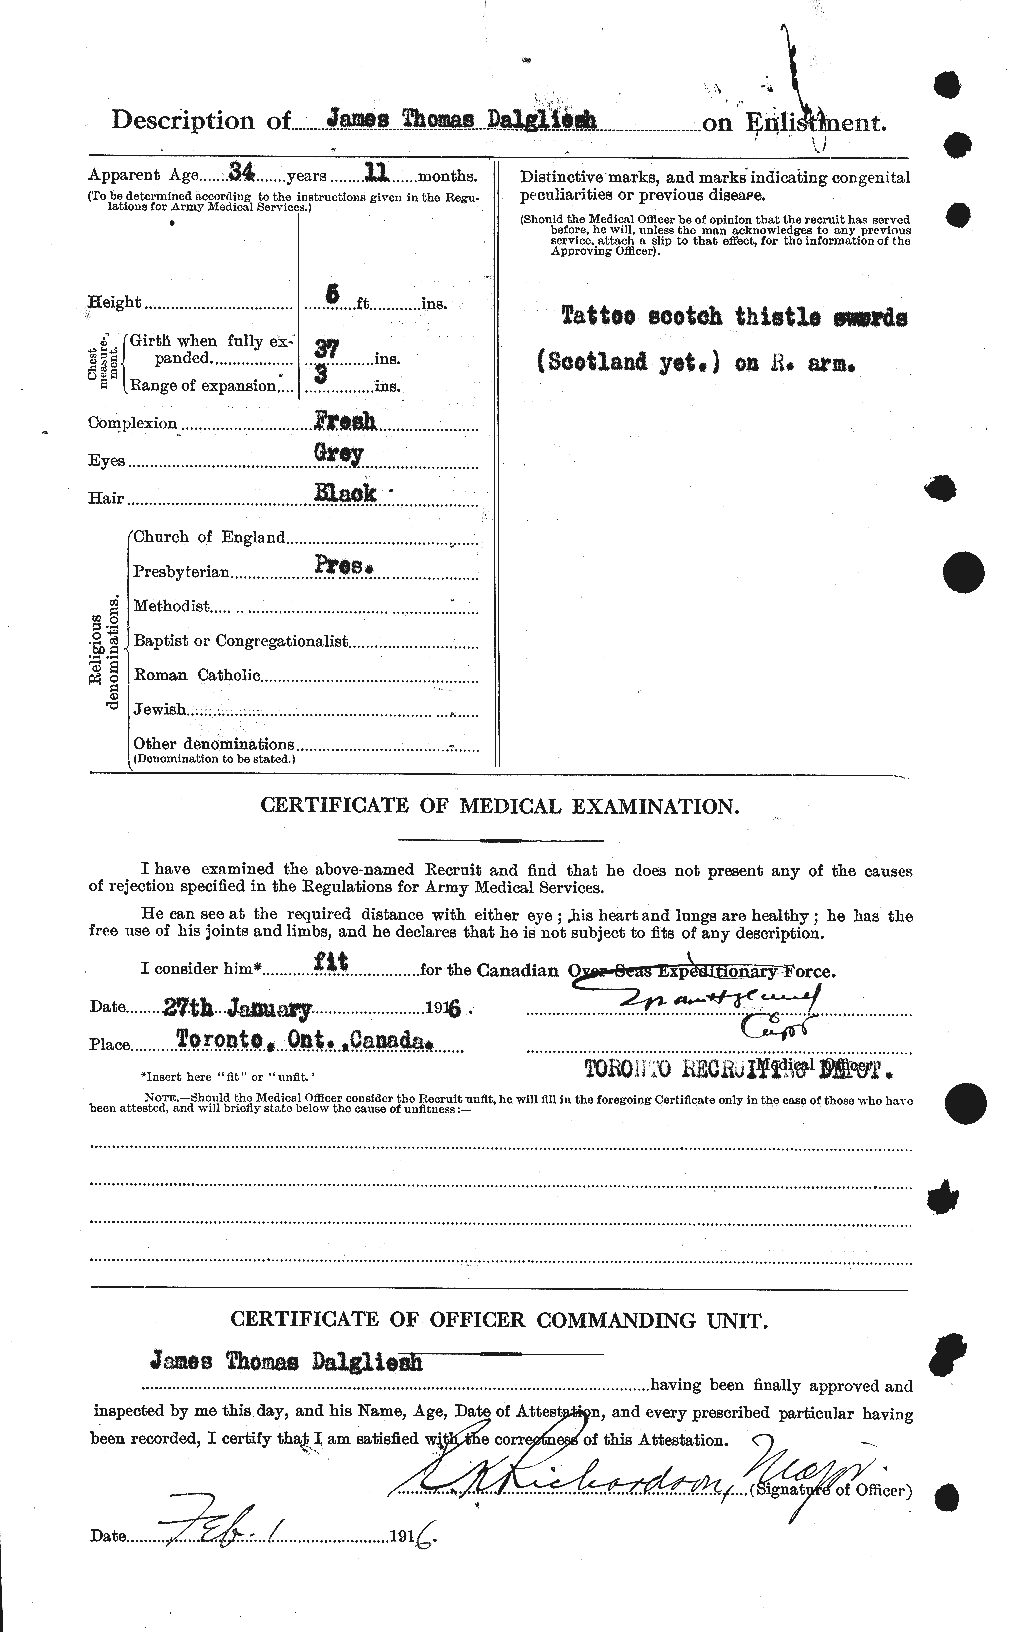 Personnel Records of the First World War - CEF 277448b